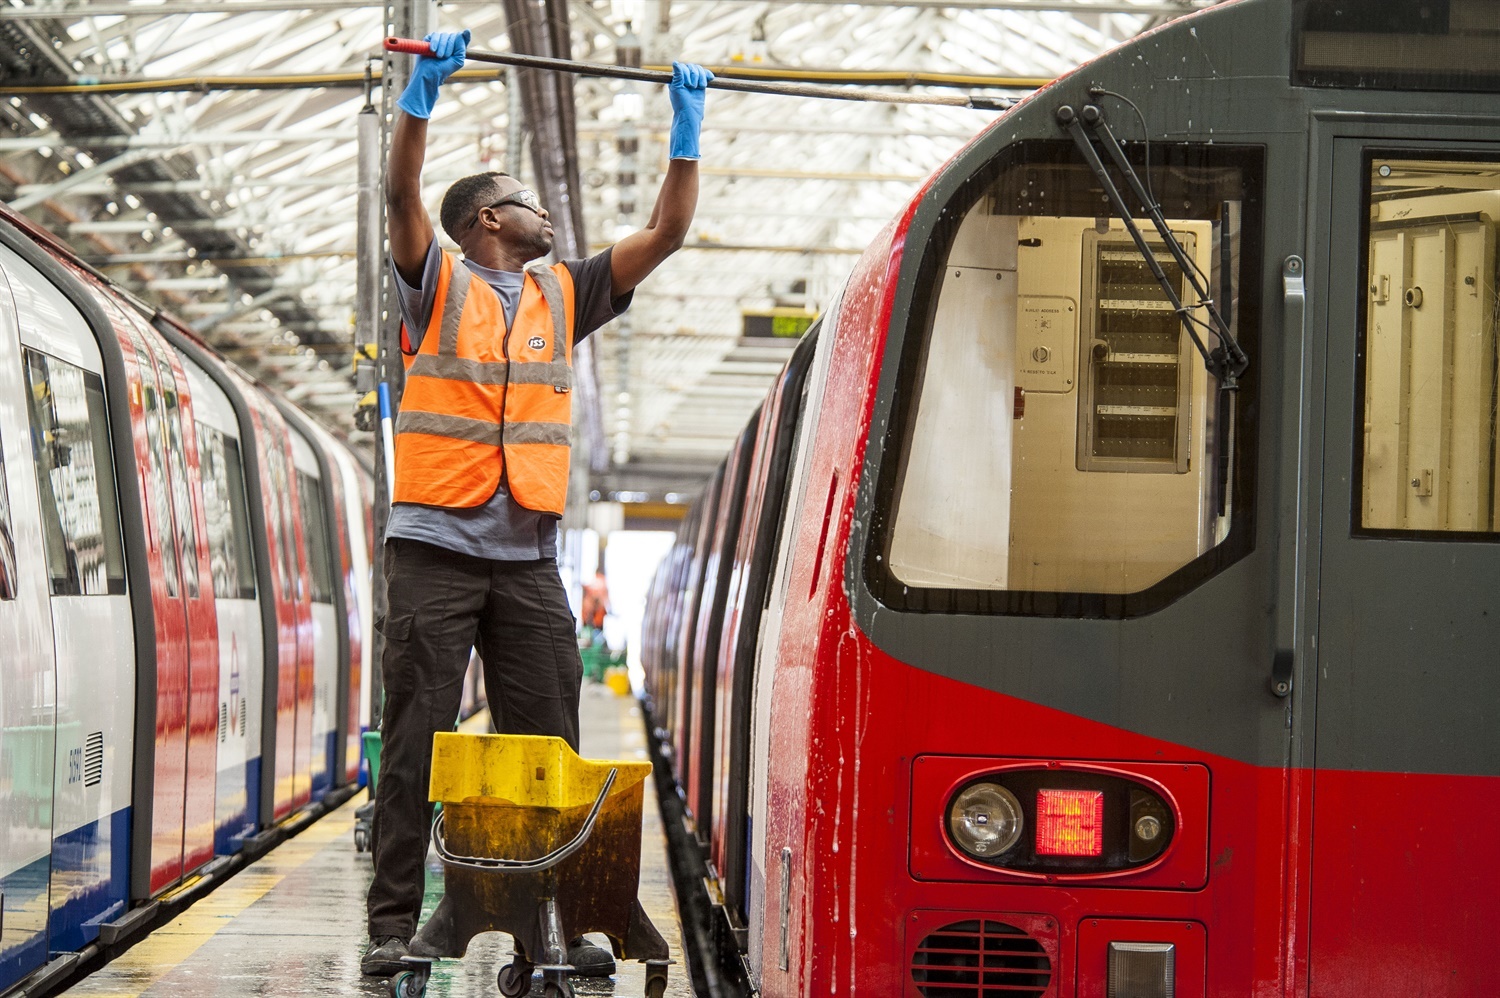 TfL to decide on extension of Alstom’s Northern Line contract